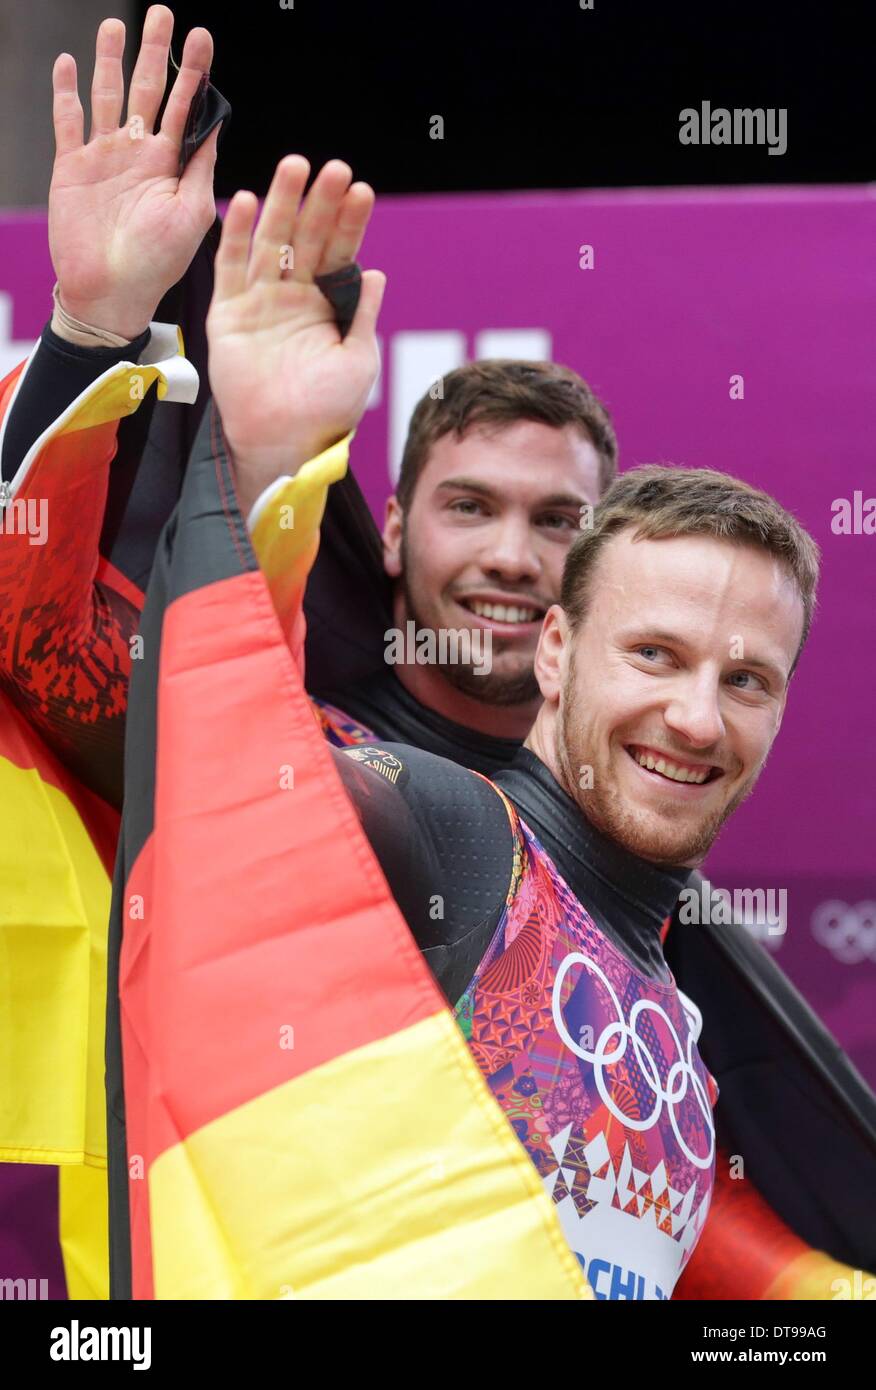 Tobias Wendl and Tobias Arlt (front) of Germany celebrate after winning the gold medal in the Luge Doubles Run 2 in Sliding Center Sanki at the Sochi 2014 Olympic Games, Krasnaya Polyana, Russia, 12 February 2014. Photo: Kay Nietfeld/dpa Stock Photo